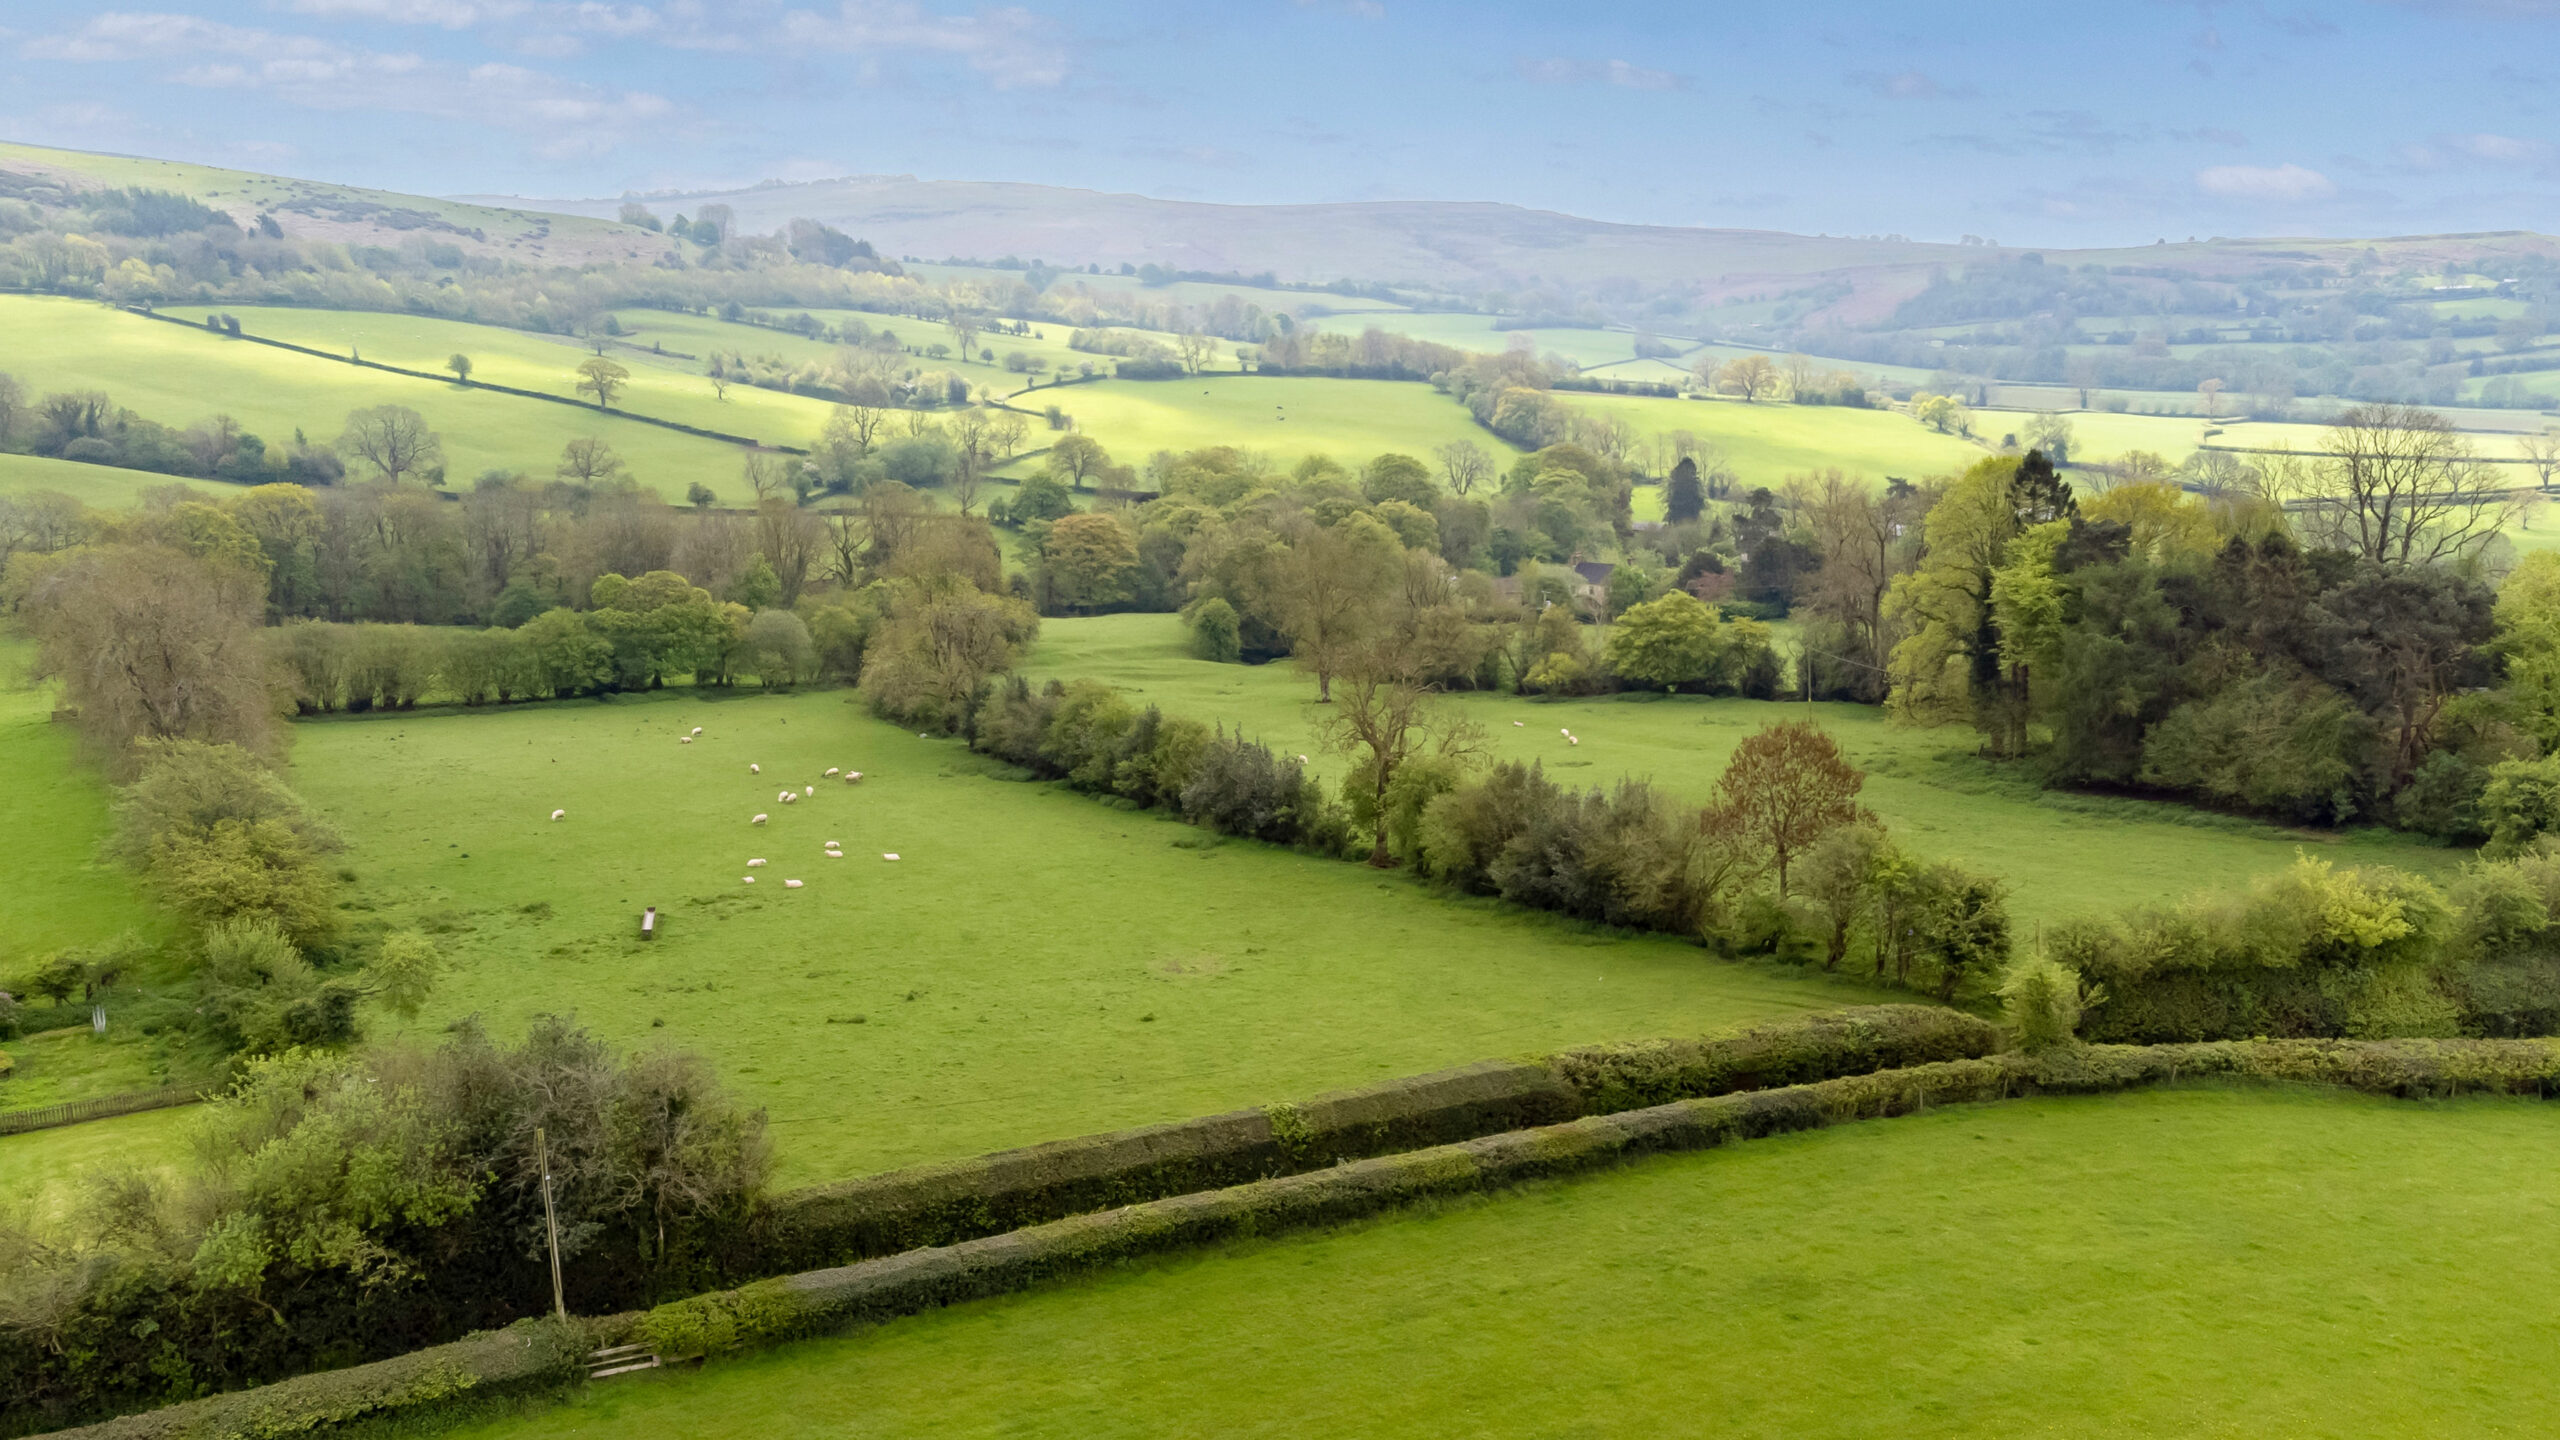 Land at Upper House Farm – on the market